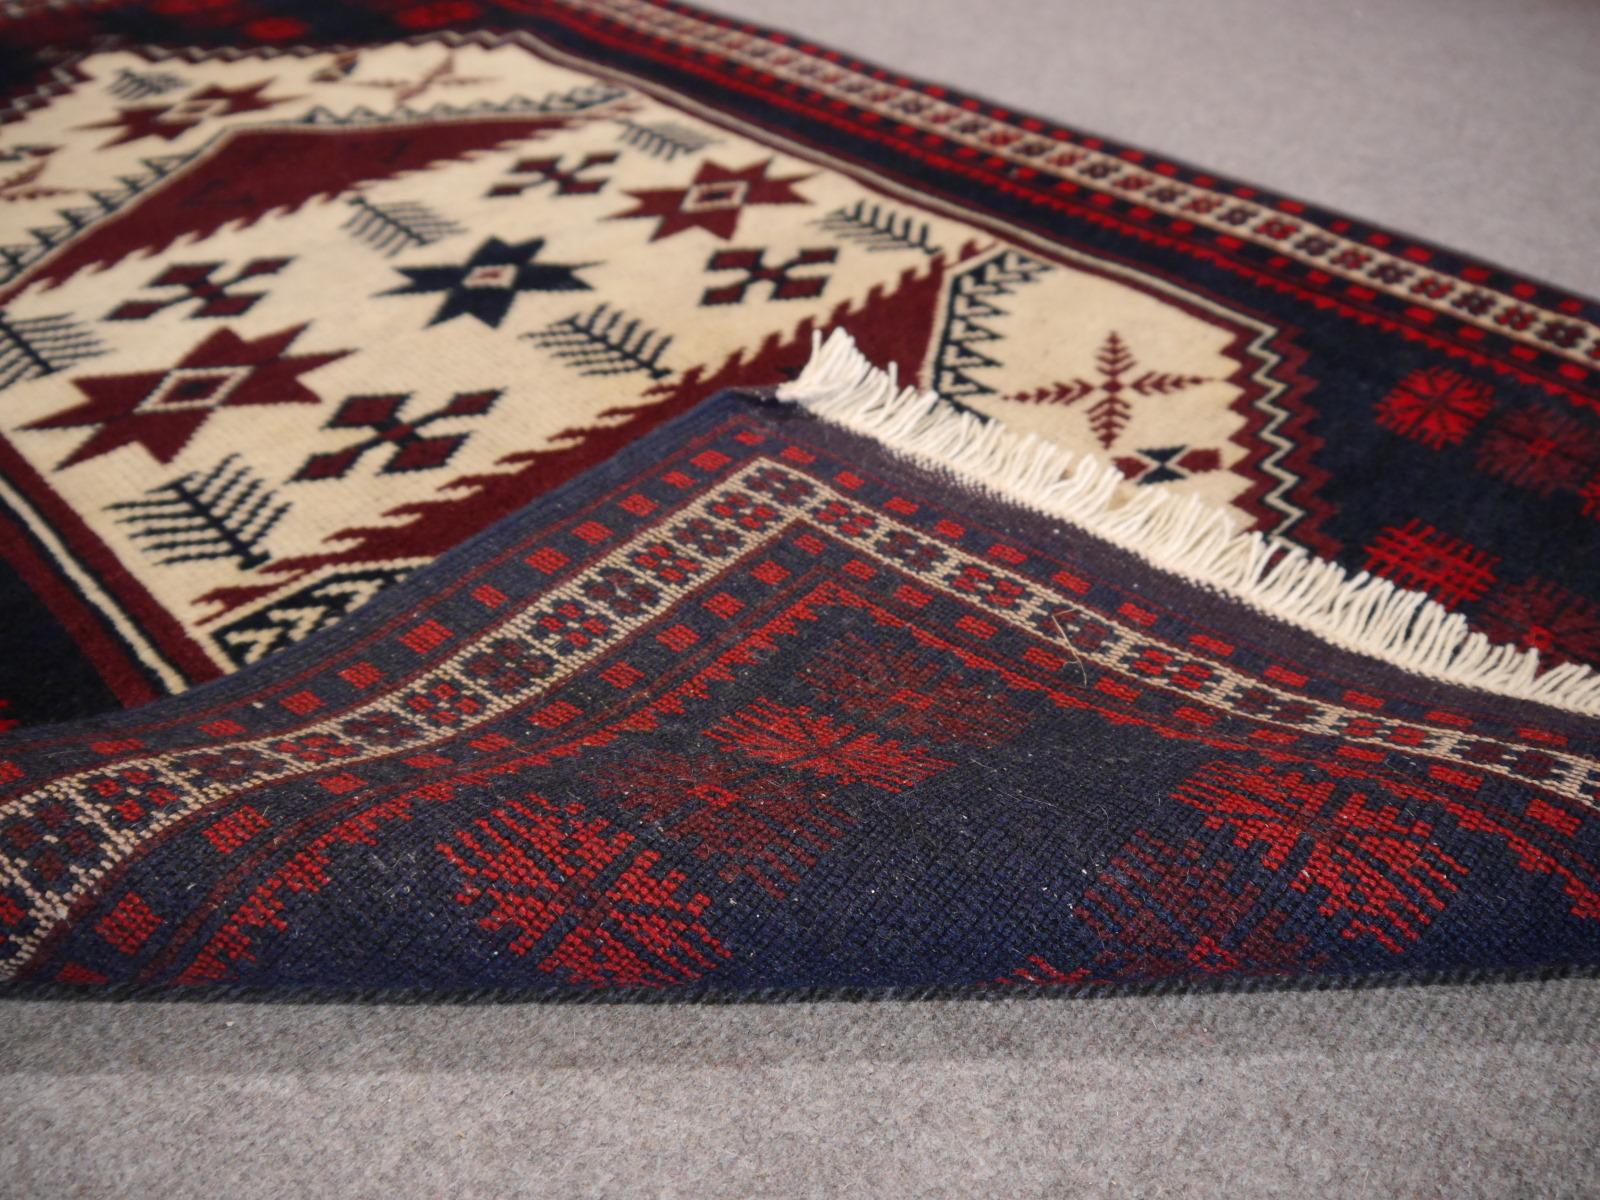 Wool Vintage Turkish Rug Slightly Worn Distressed Industrial Look Hand-Knotted For Sale